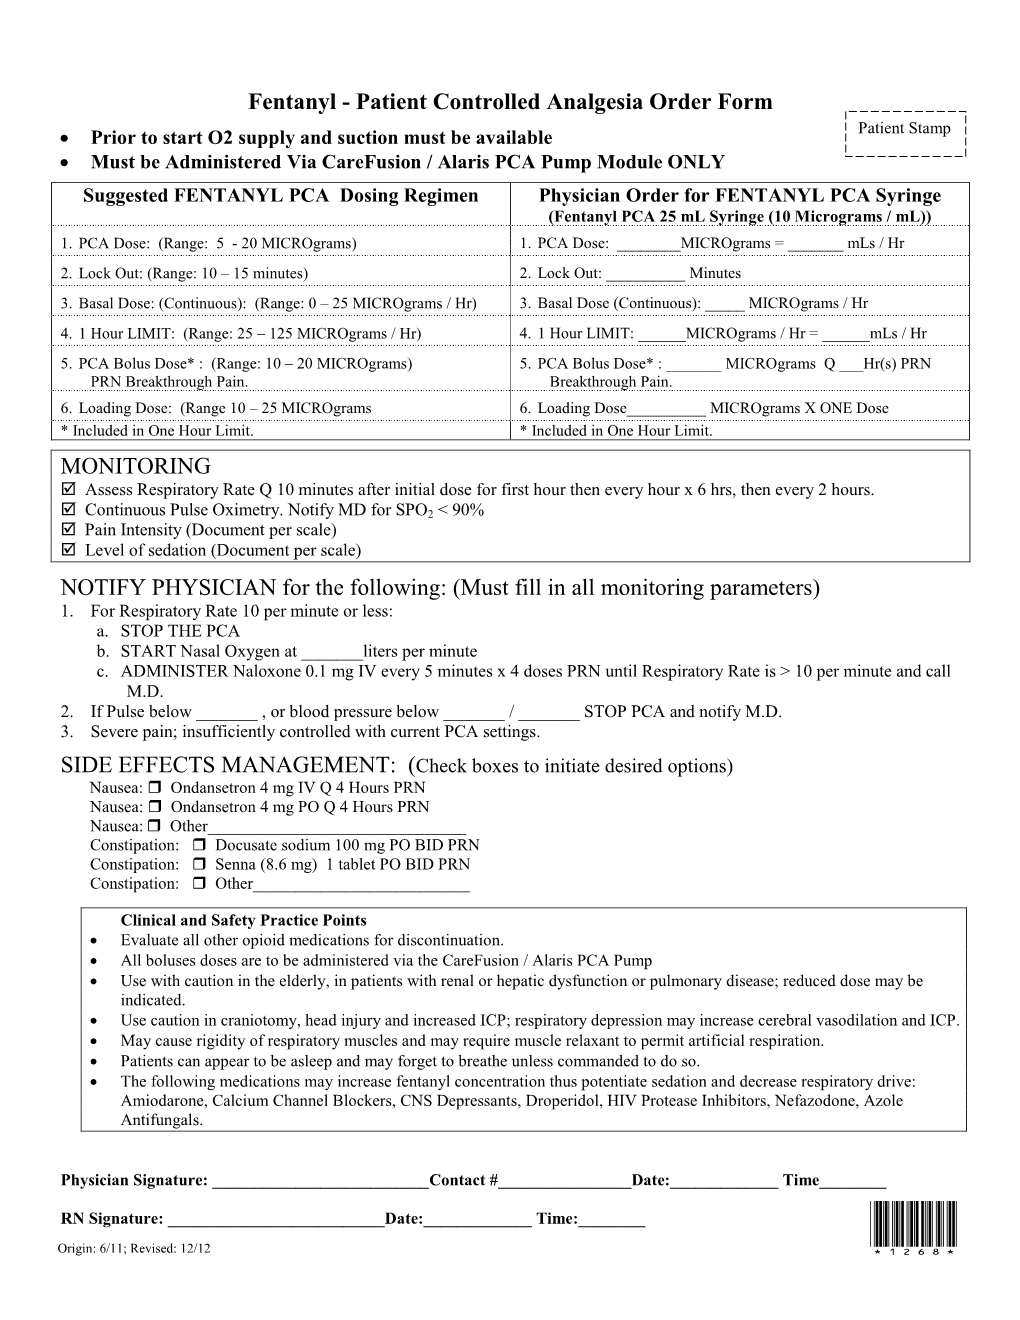 Fentanyl - Patient Controlled Analgesia Order Form